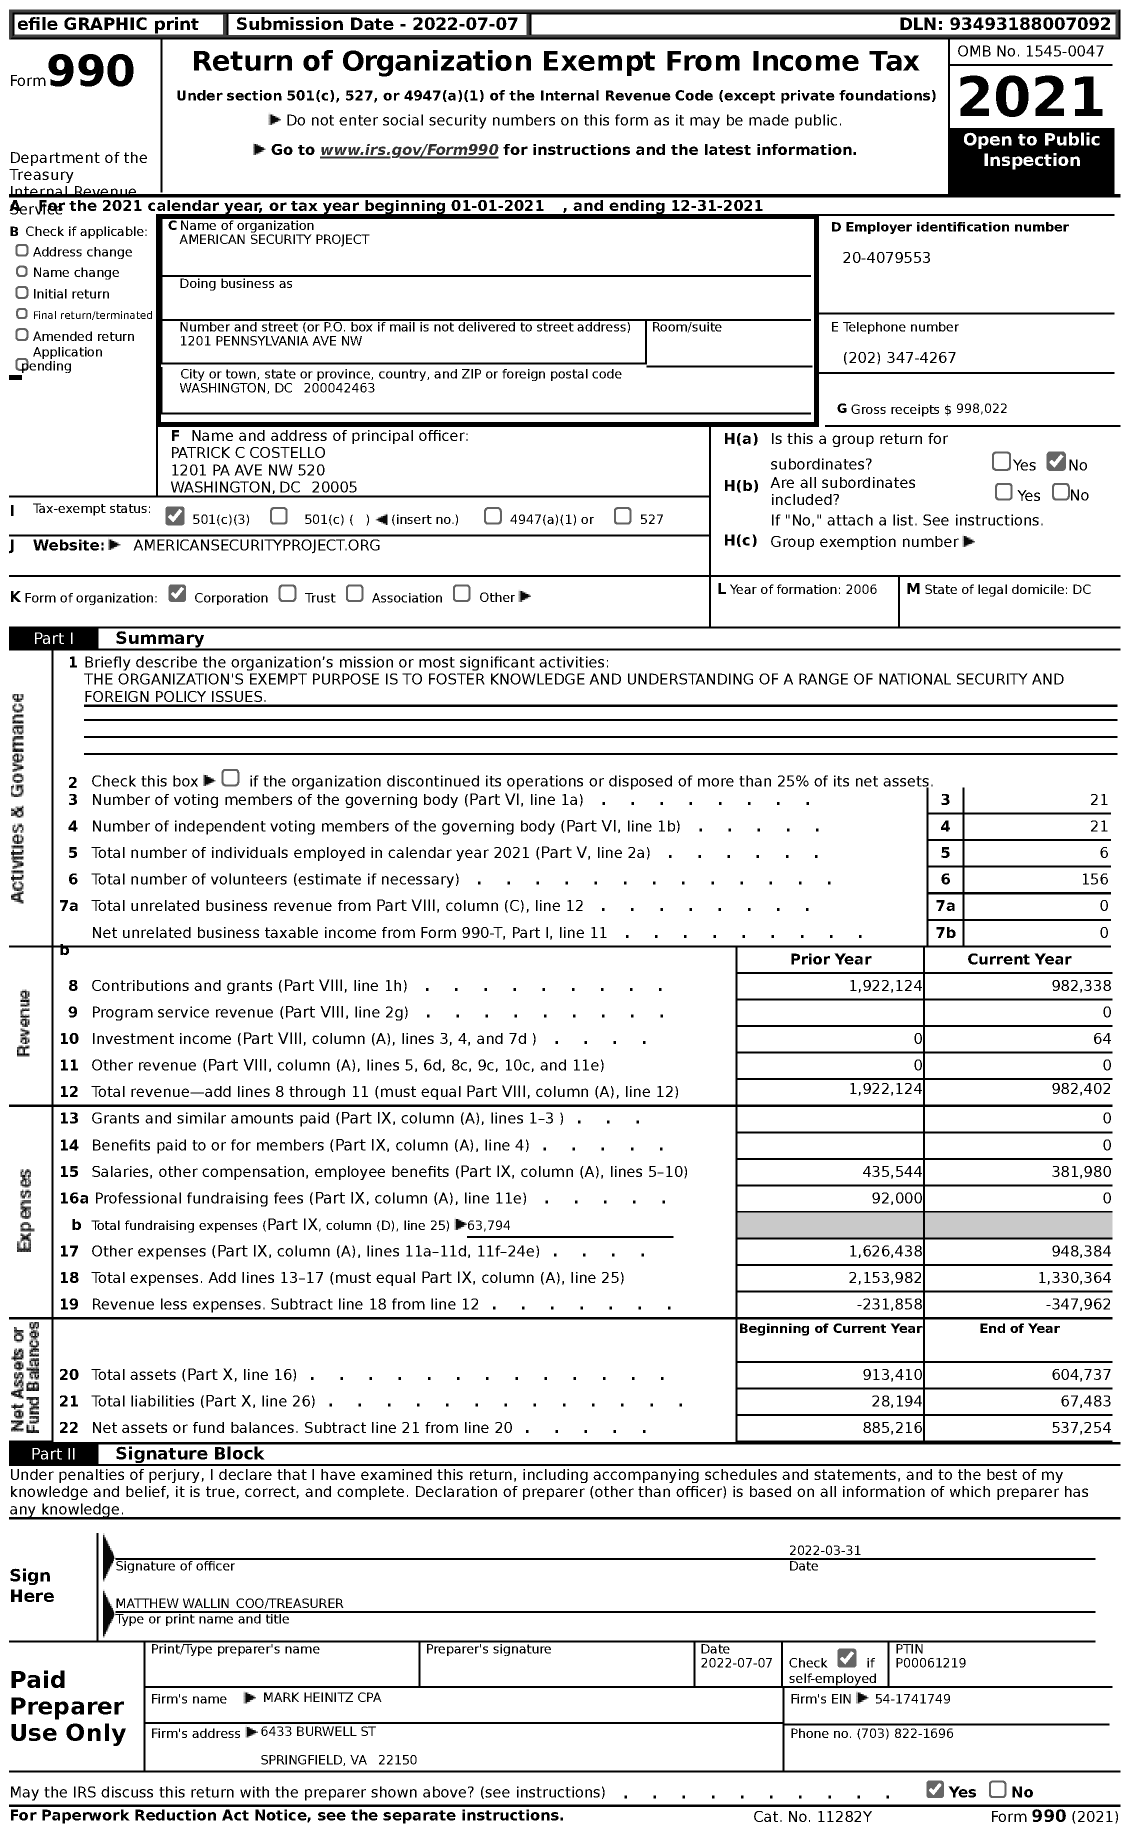 Image of first page of 2021 Form 990 for American Security Project